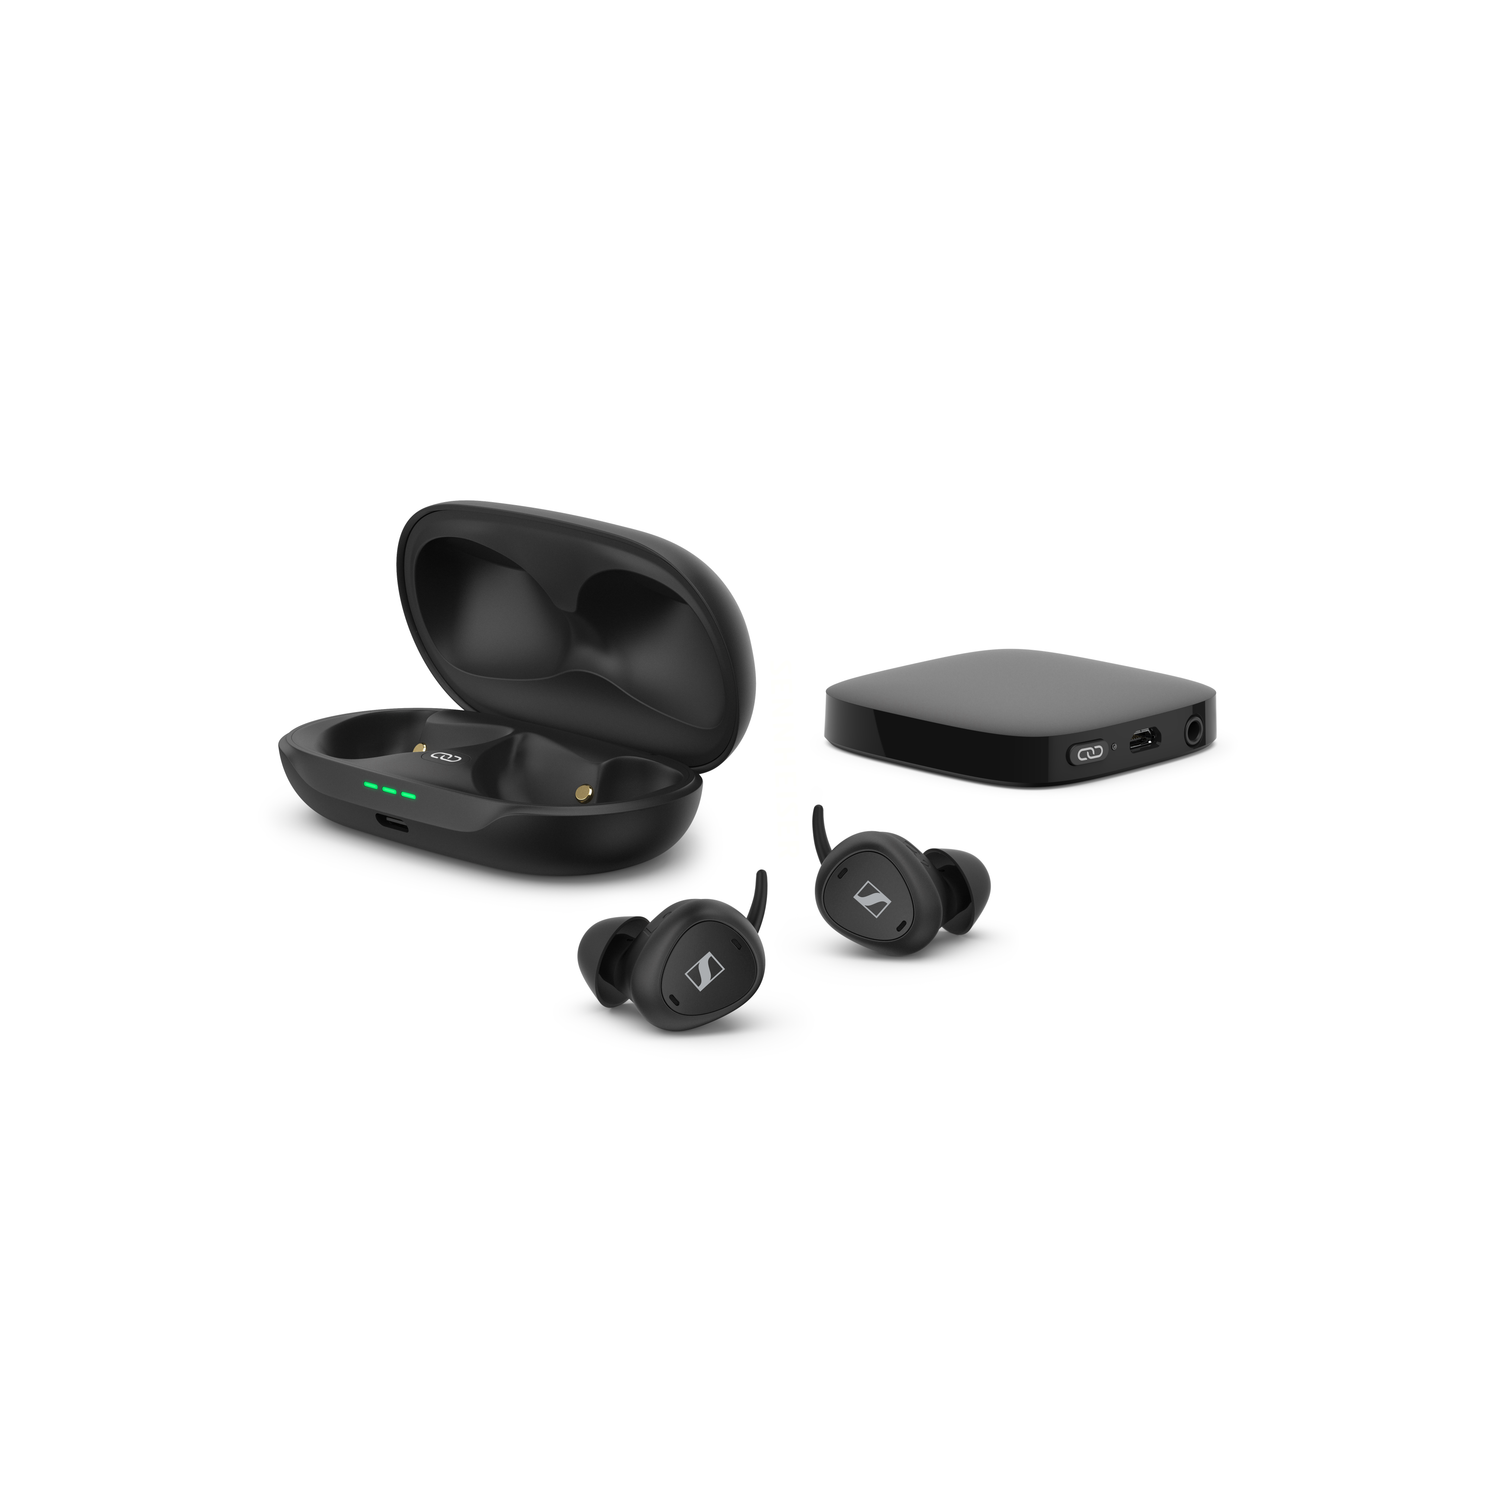 Sennheiser TV Clear Set – Truly Wireless Earbuds & TV Connector – Bluetooth in-Ear Headphones for TV with Ambient Awareness, Passive Noise Cancellation, and Qi Wireless Charging